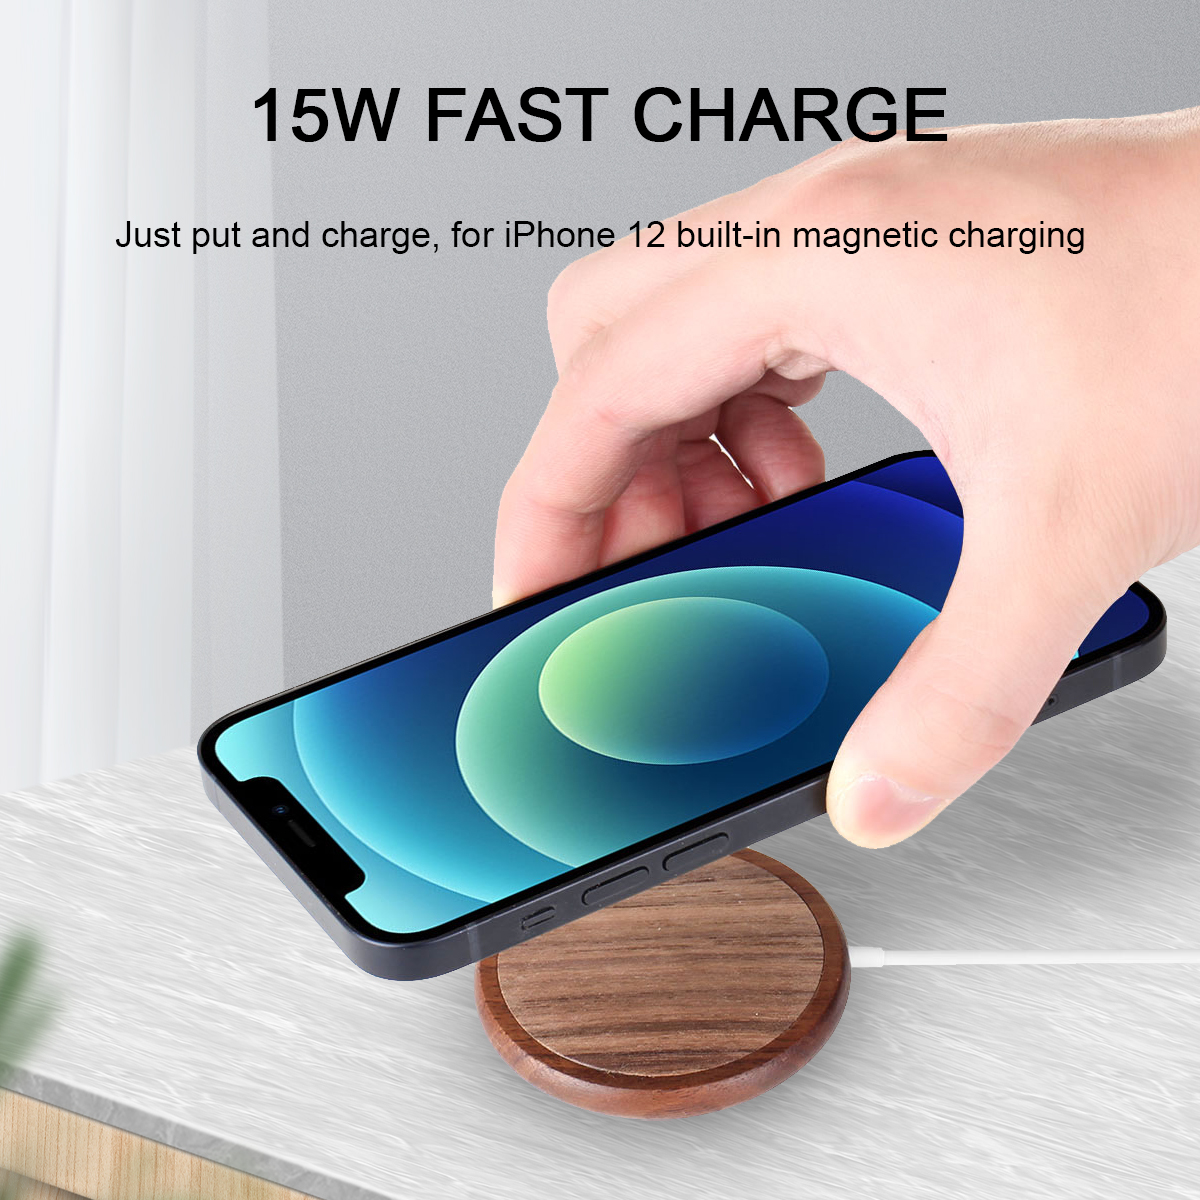 Bakeey-15W-Magnetic-Wireless-Charger-for-iPhone-12-Series-for-iPhone-12-Mini12-Pro12-Pro-Max-for-Sam-1809701-4